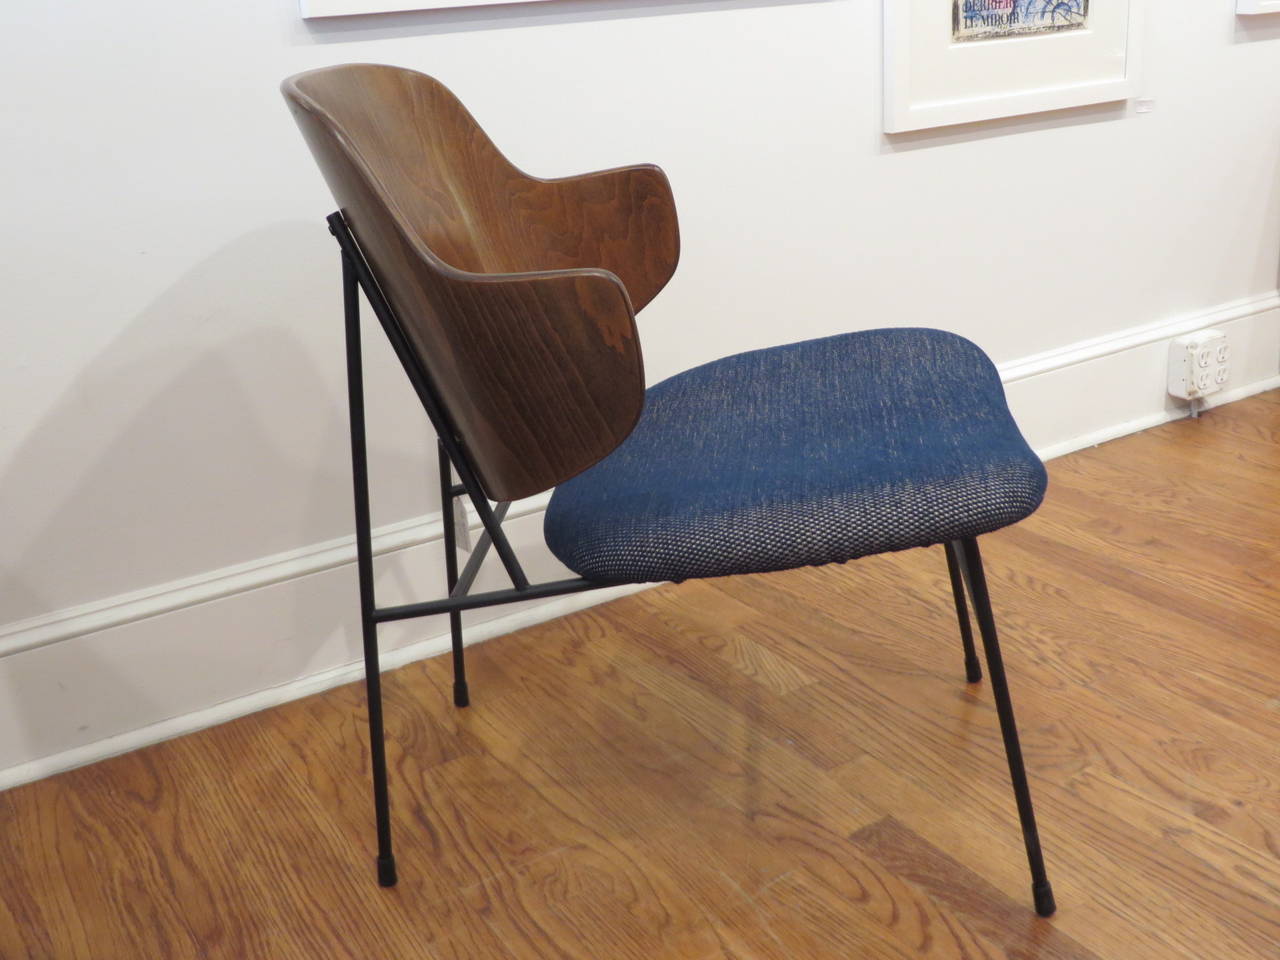 1950s armchair by Danish designer Ib Kofod-Larsen. He designed variations of this easy chair in metal and wood and all retain the iconic large back and joinery of the legs to the backrest. The chair is very comfortable and looks great from every